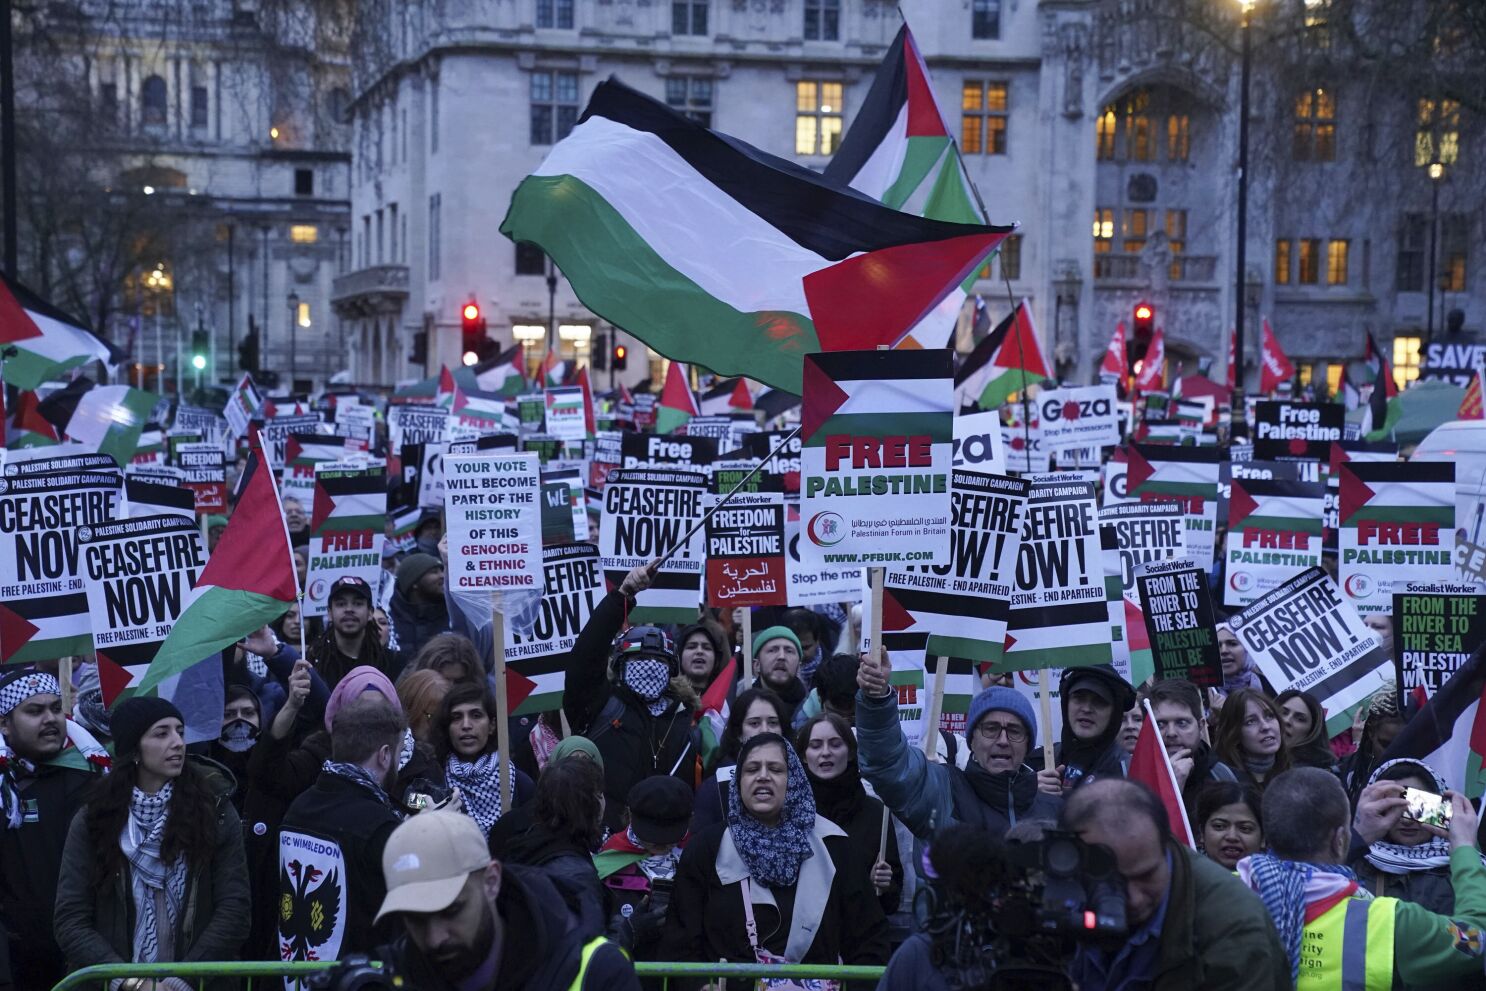 Parliament erupts as lawmakers clash over Gaza ceasefire vote (Credits: AP News)